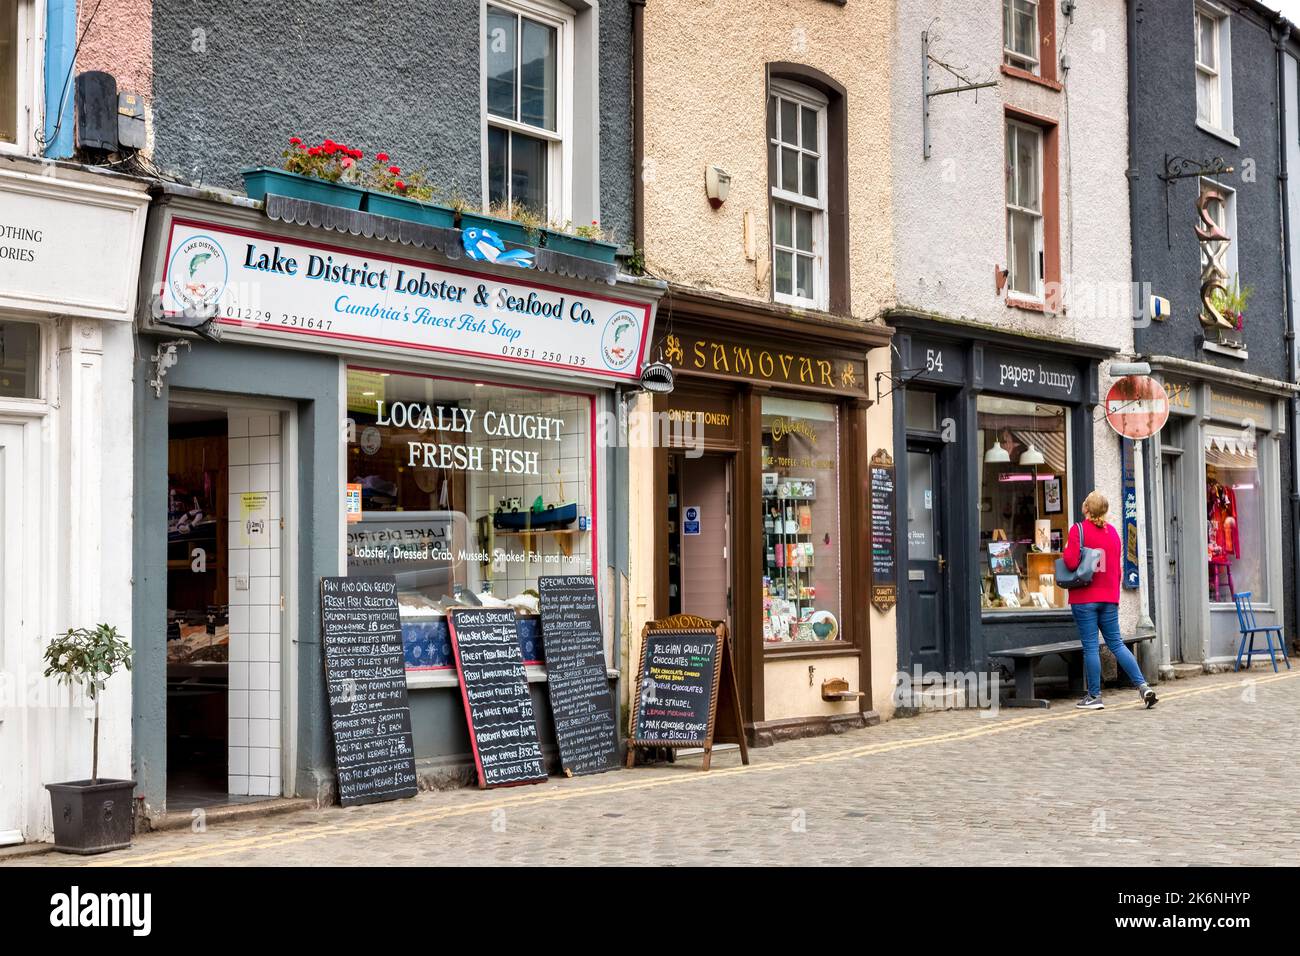 20 May 2022: Ulverston, Cumbria, UK - Independent shops in the high street, with fresh fish shop, confectionary, and others. One woman window shopping Stock Photo